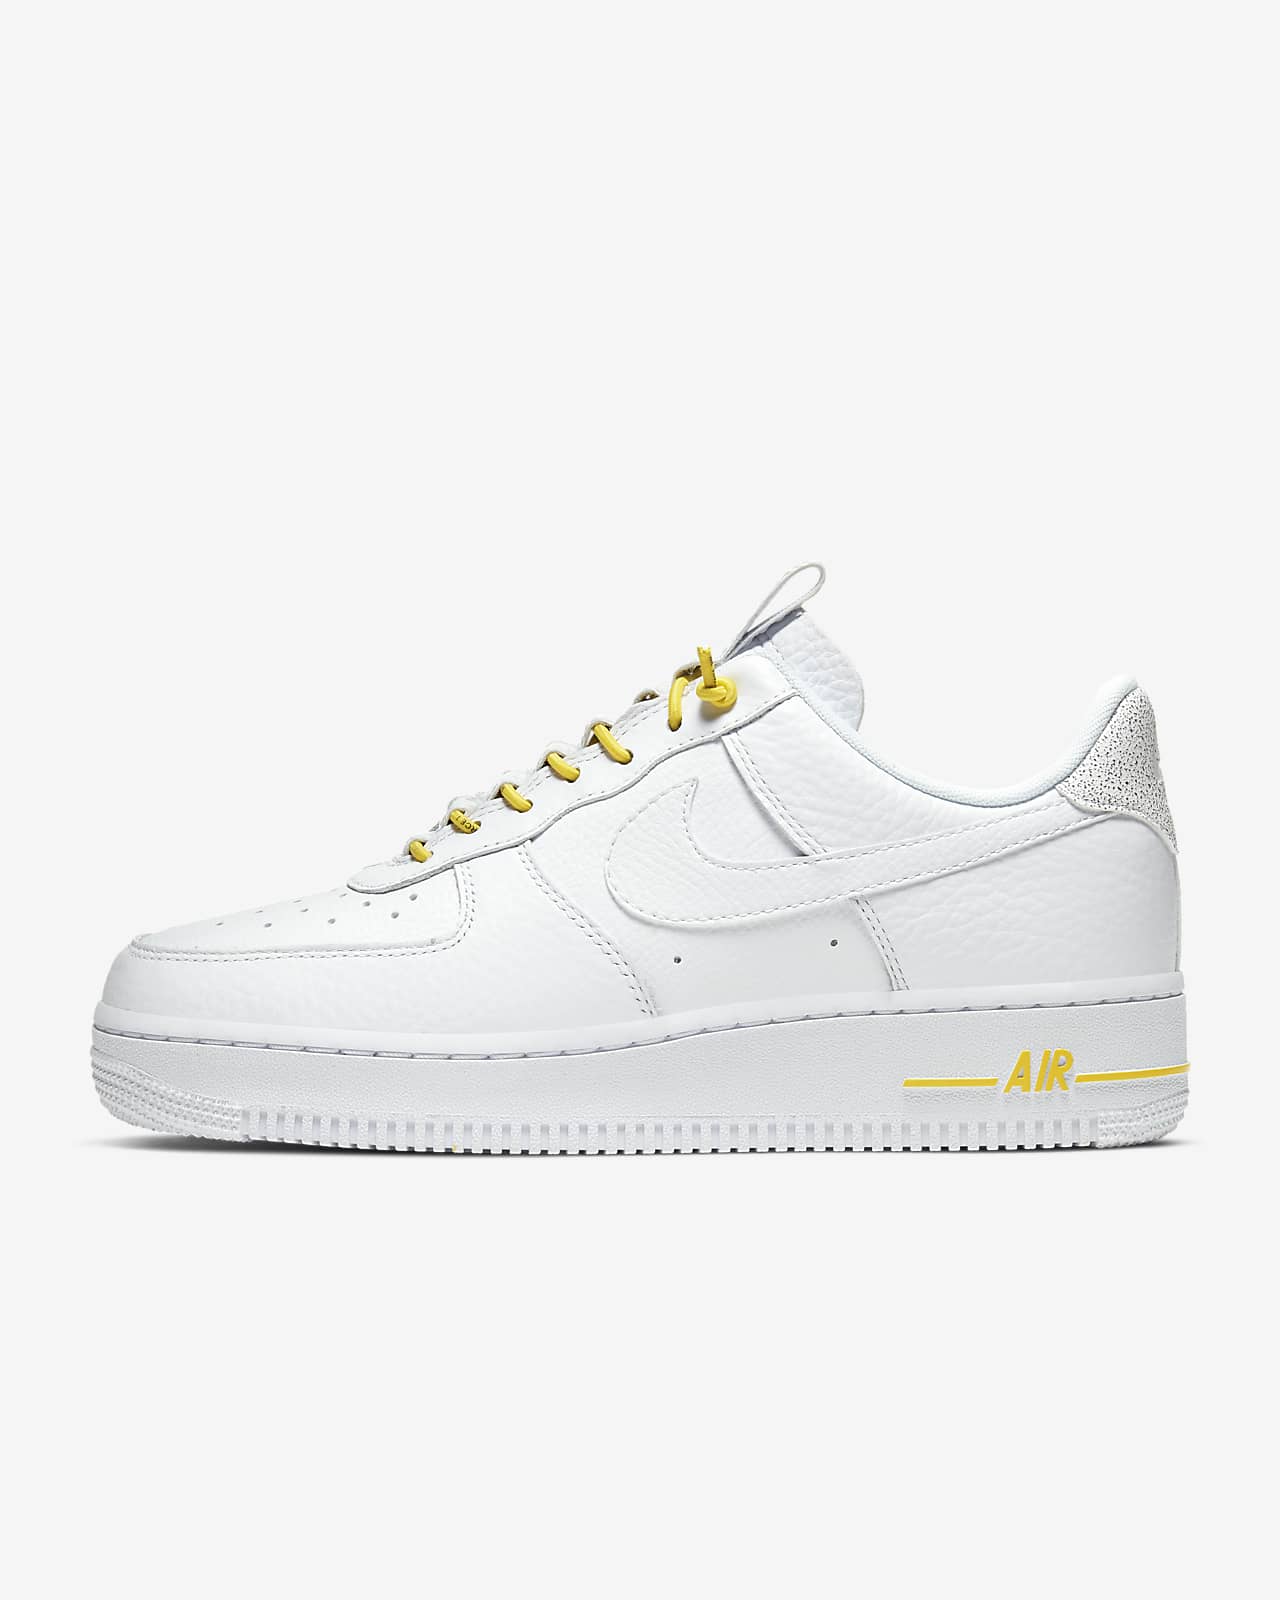 Nike Air Force 1 '07 Luxe 女鞋。Nike TW